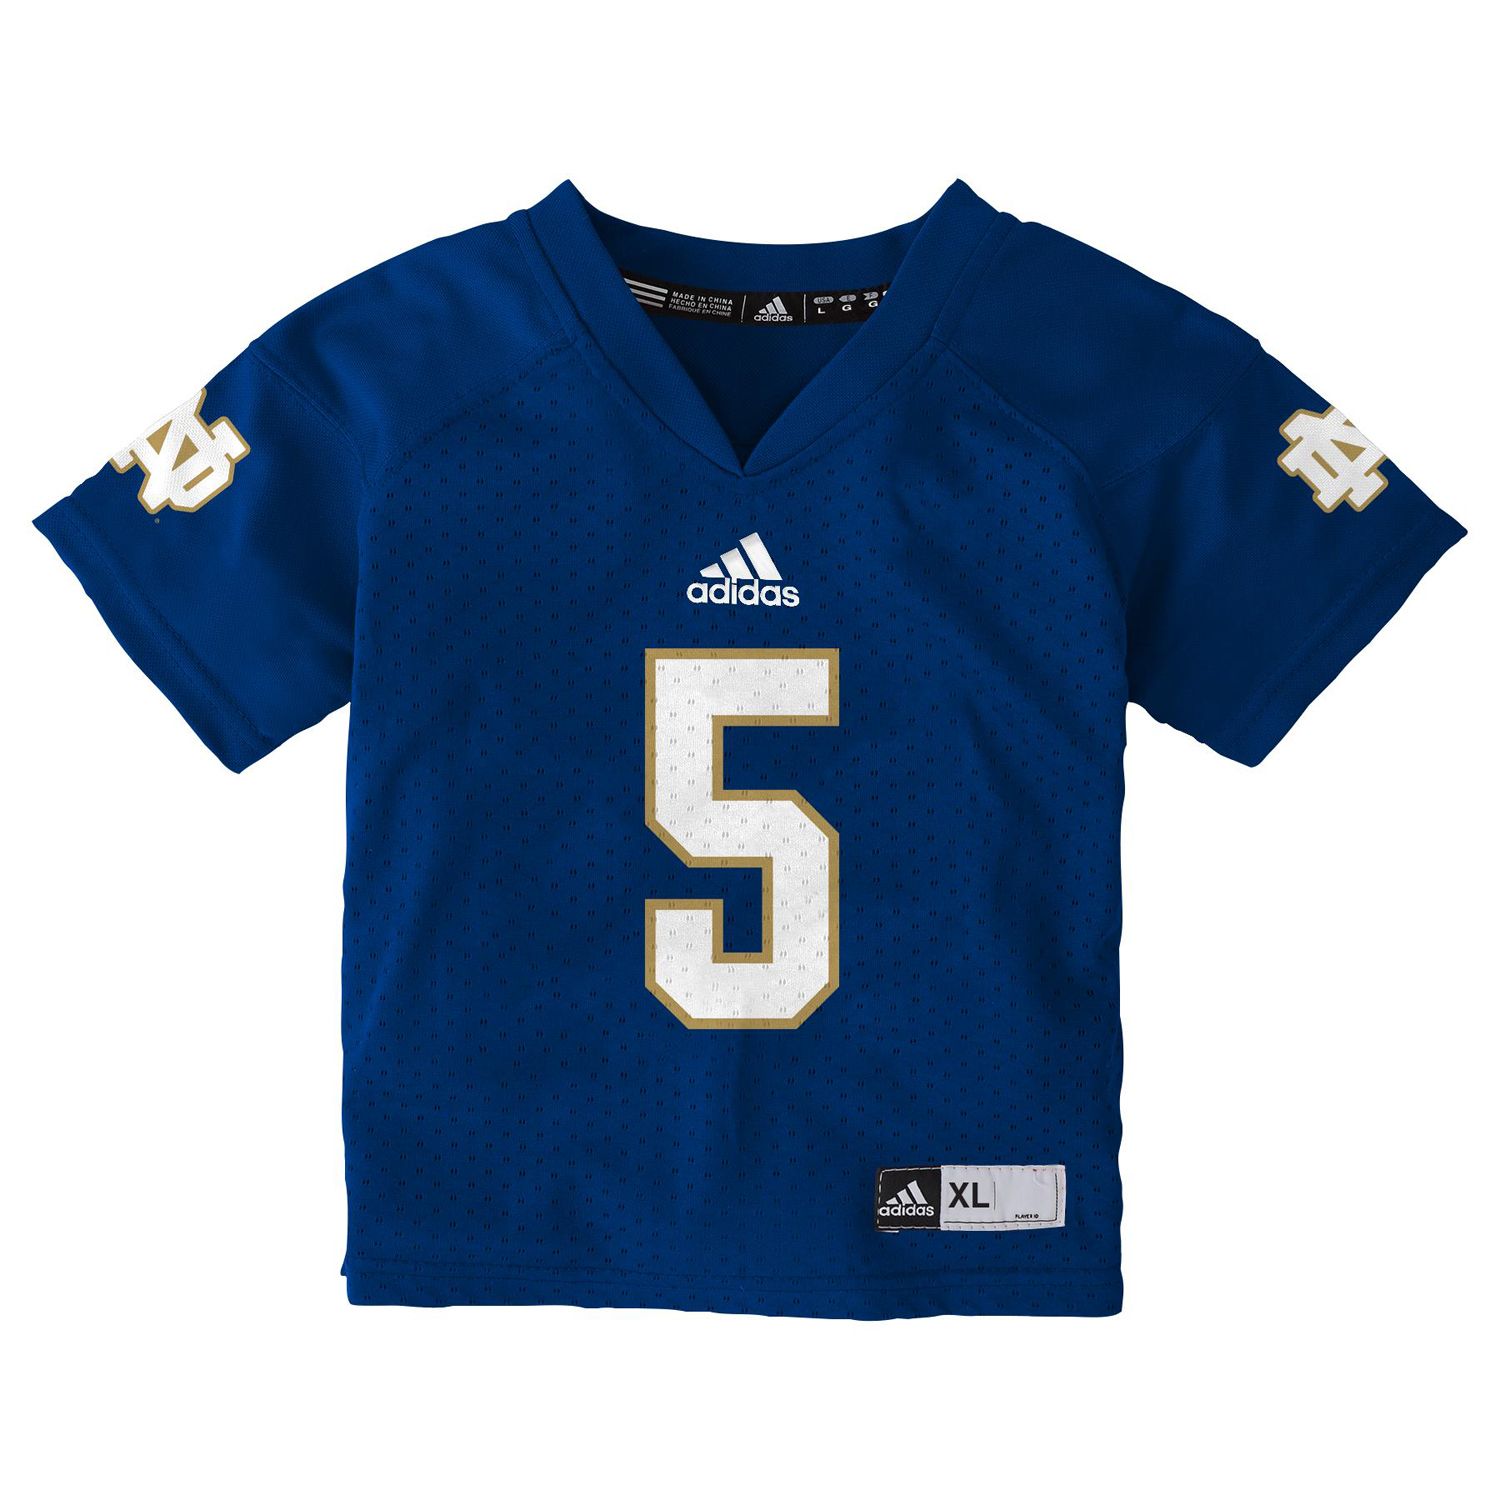 notre dame toddler jersey